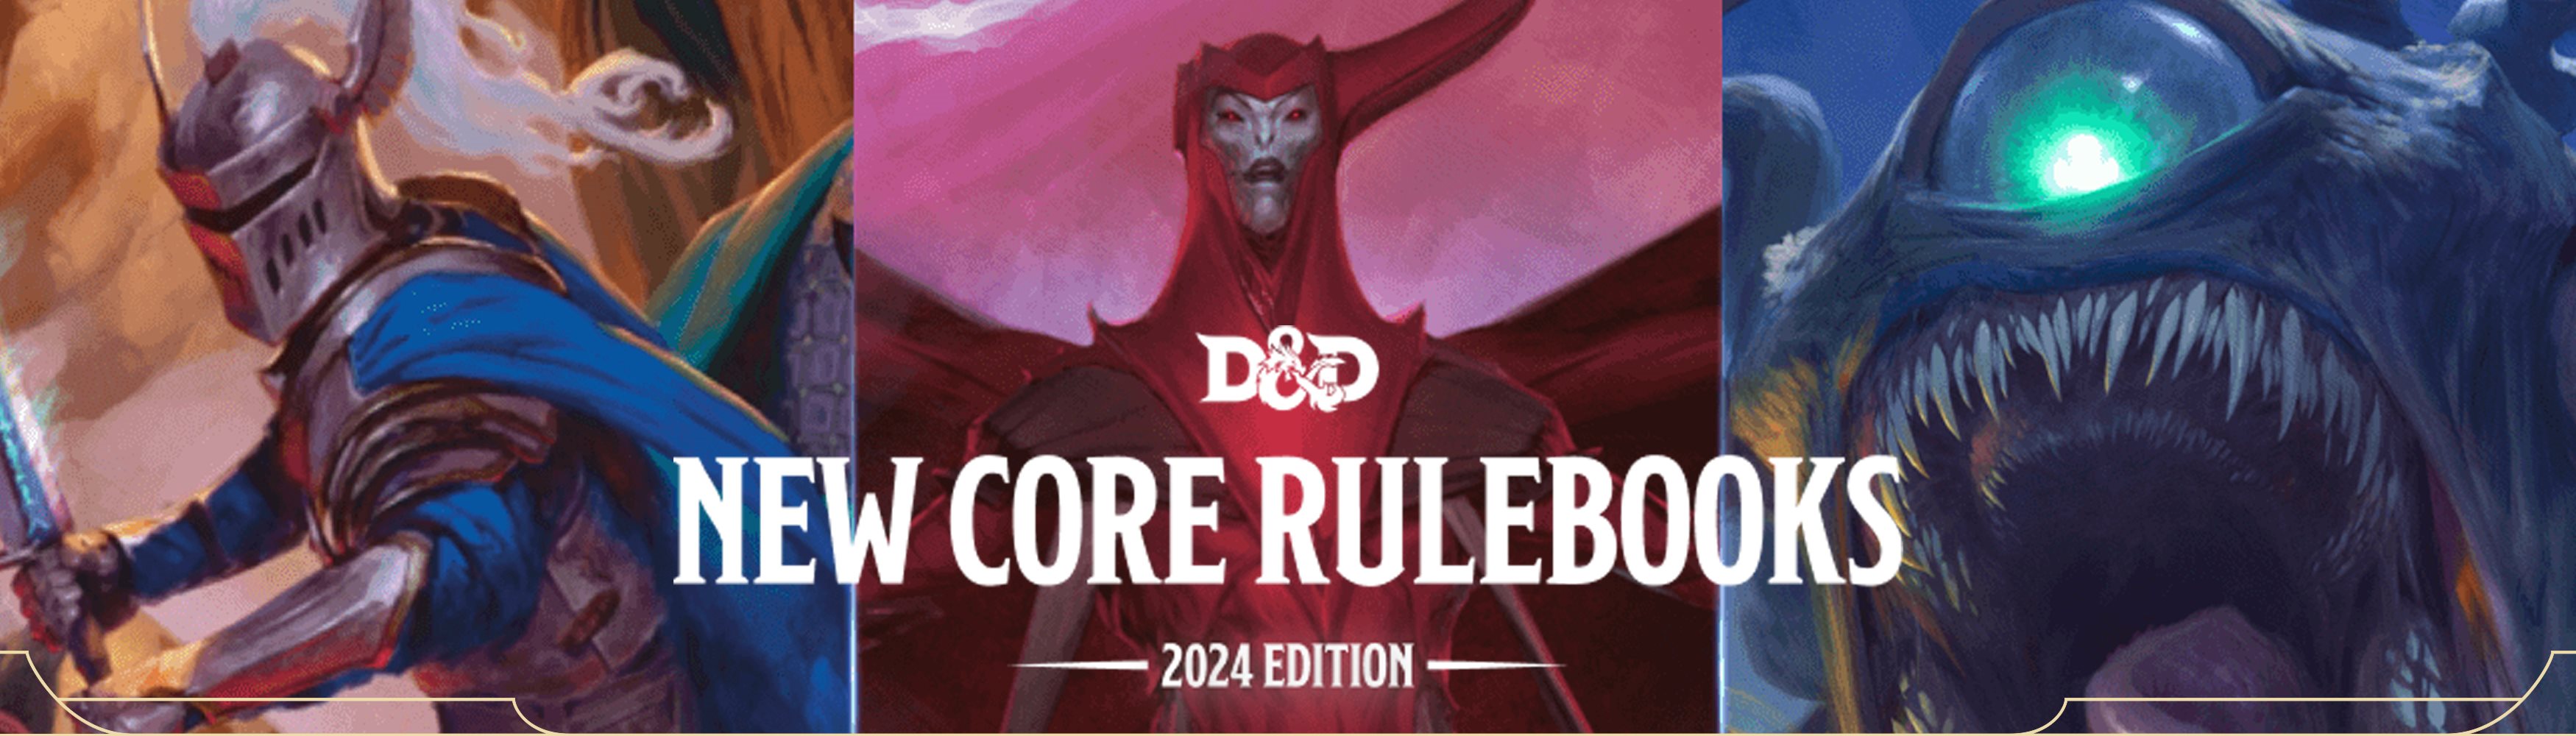 Celebrate 50 years of DND with the new 2024 Core Rulebooks!